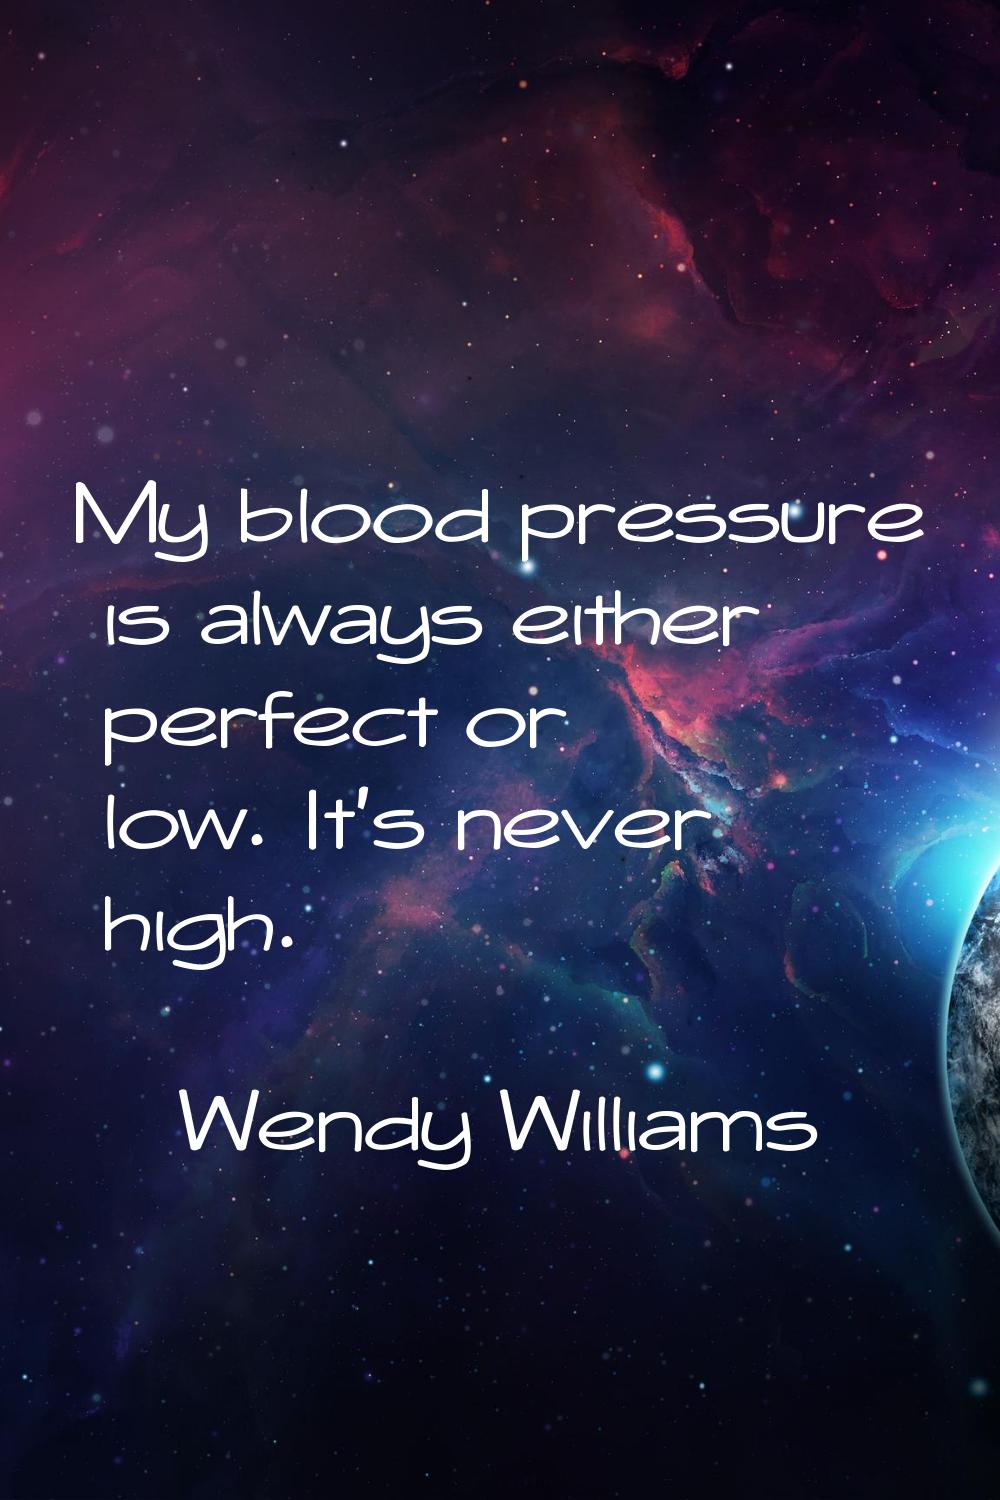 My blood pressure is always either perfect or low. It's never high.